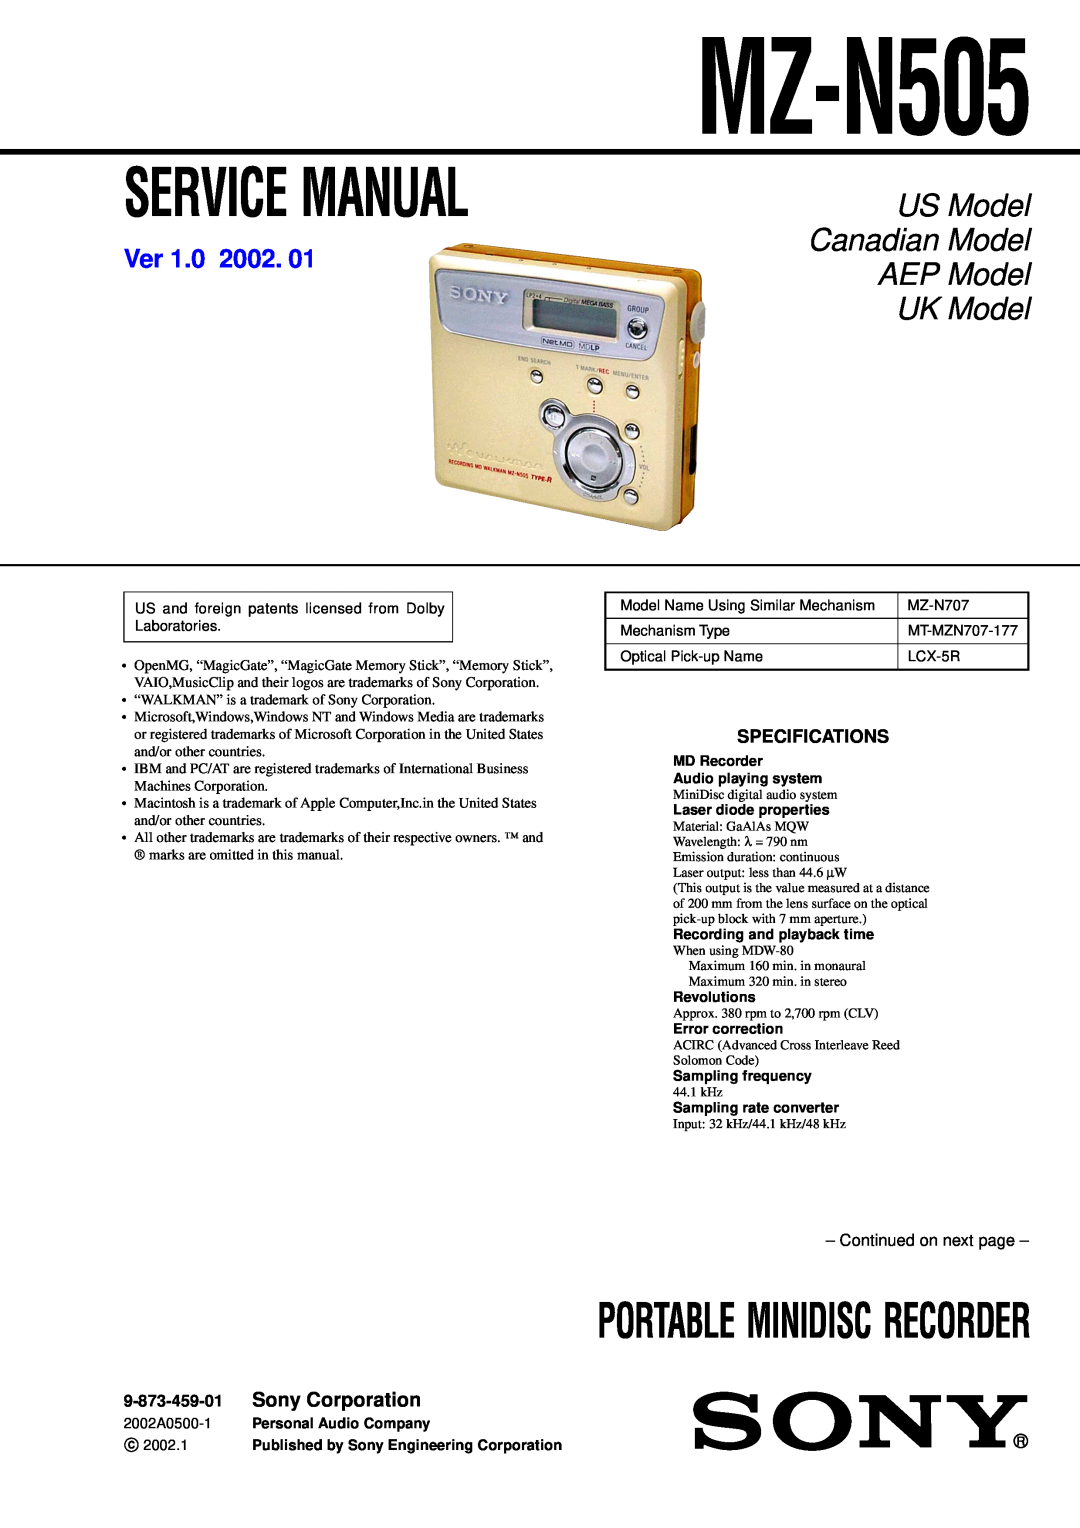 Sony MZ-N505 service manual Sony Corporation, Specifications, Portable Minidisc Recorder, US Model, Canadian Model, Ver 